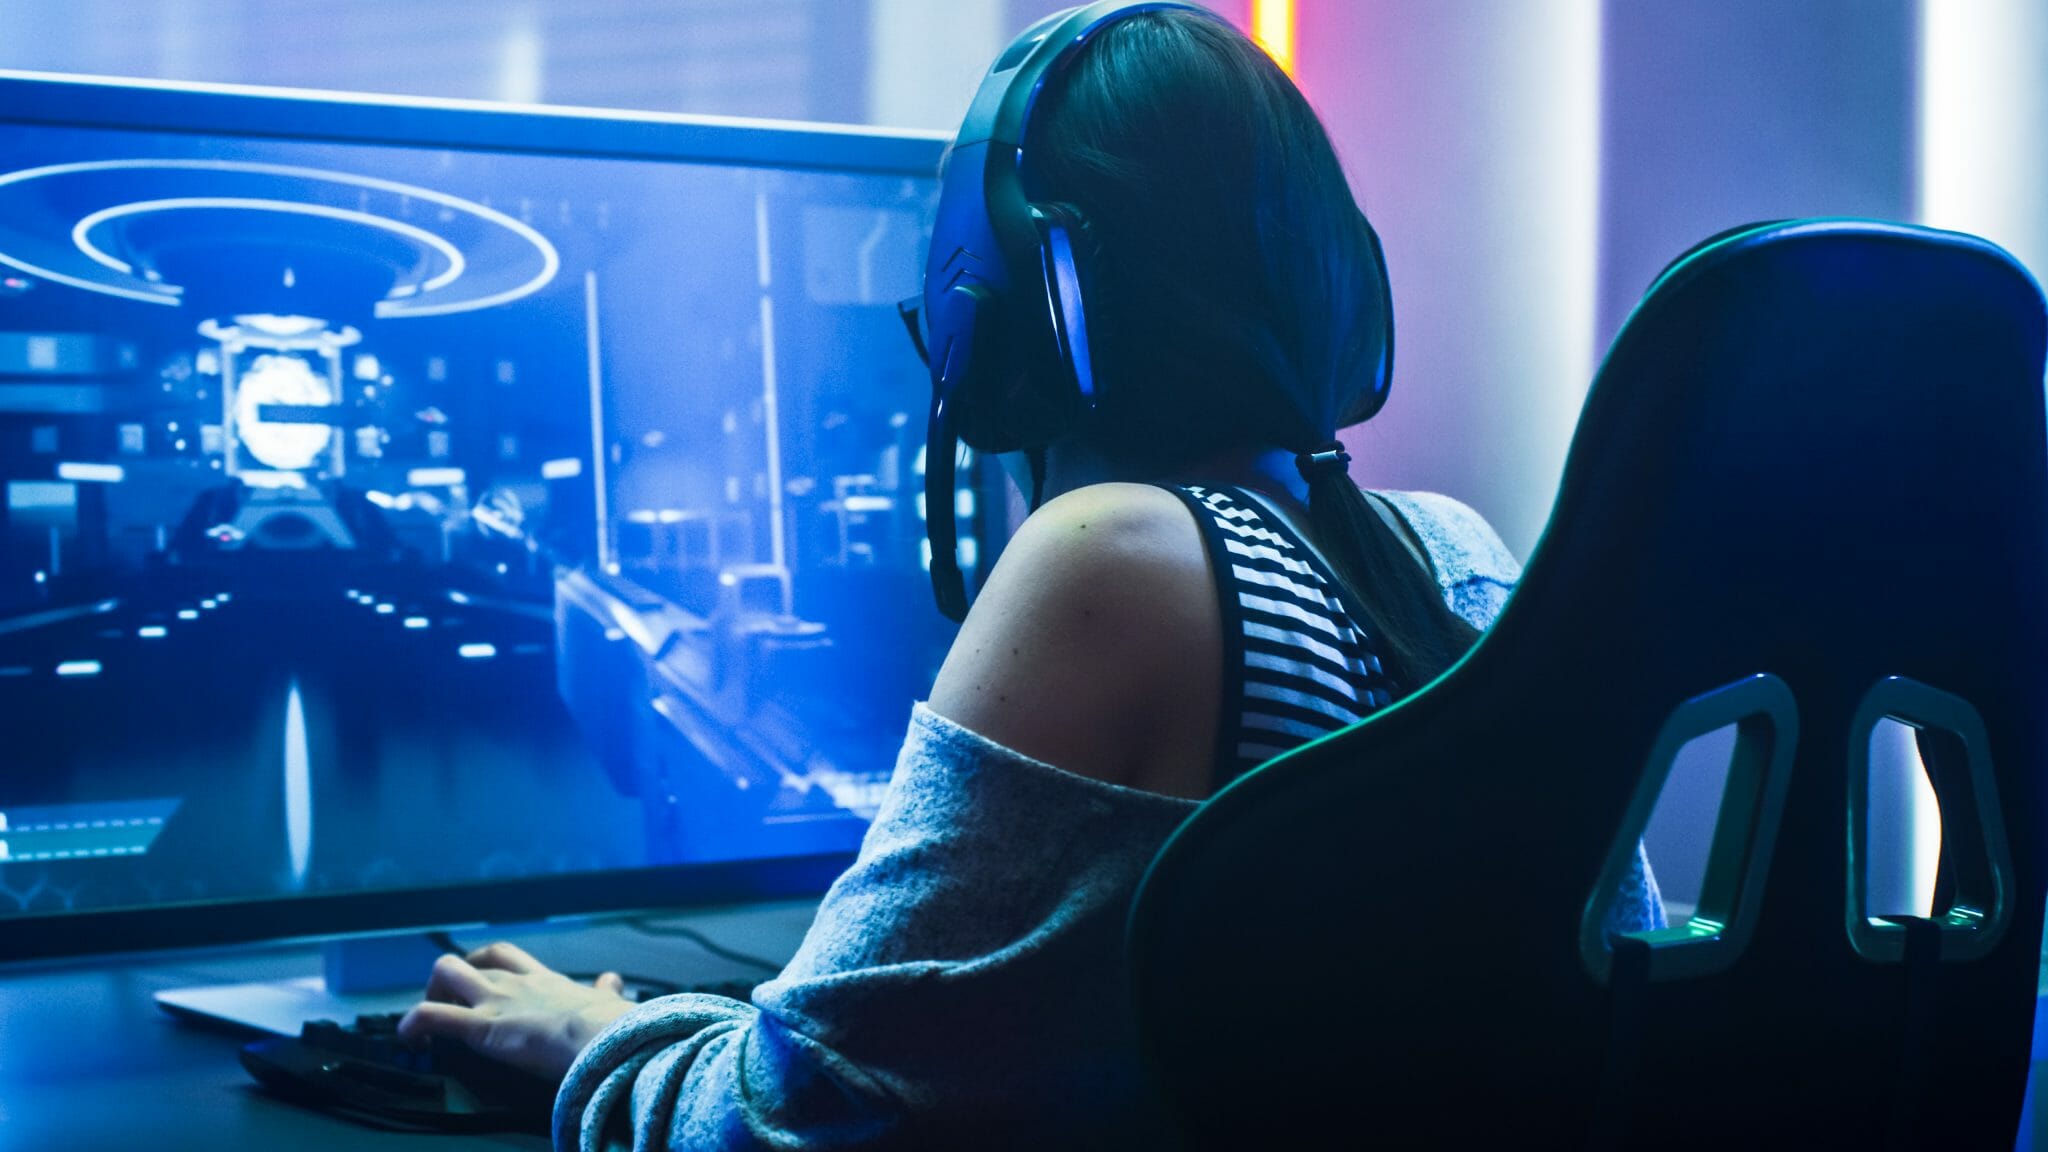 Female with back to the camera playing an FPS game on PC